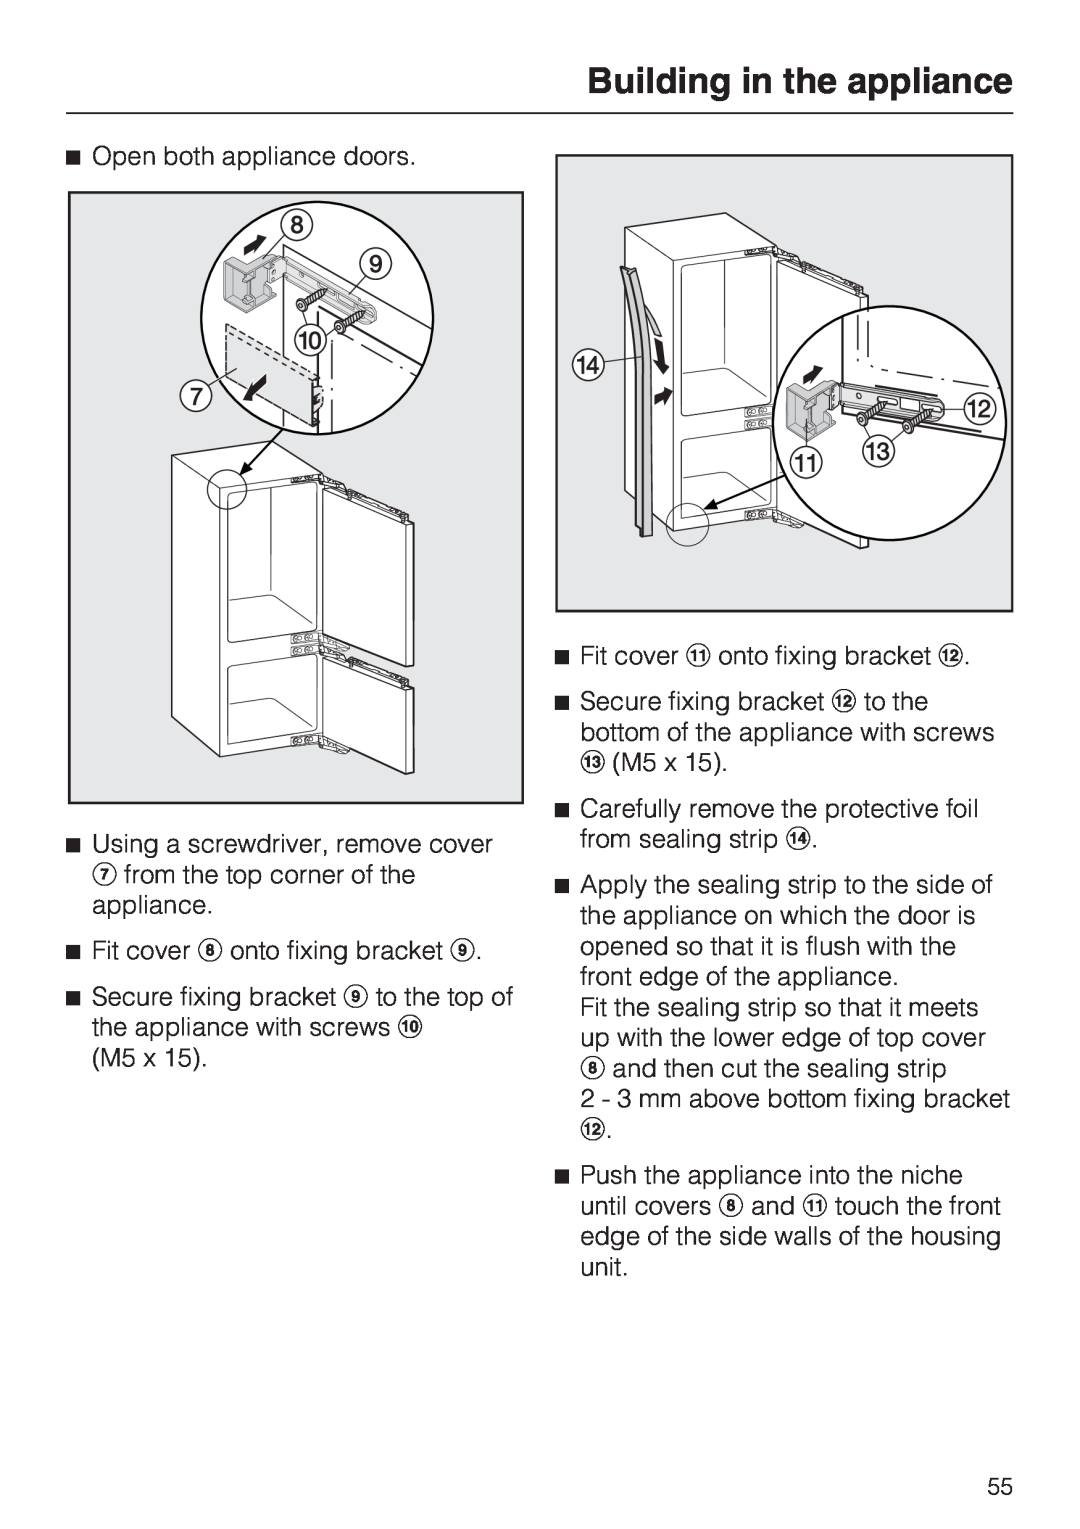 Miele KF 9757 ID installation instructions Building in the appliance, Open both appliance doors 